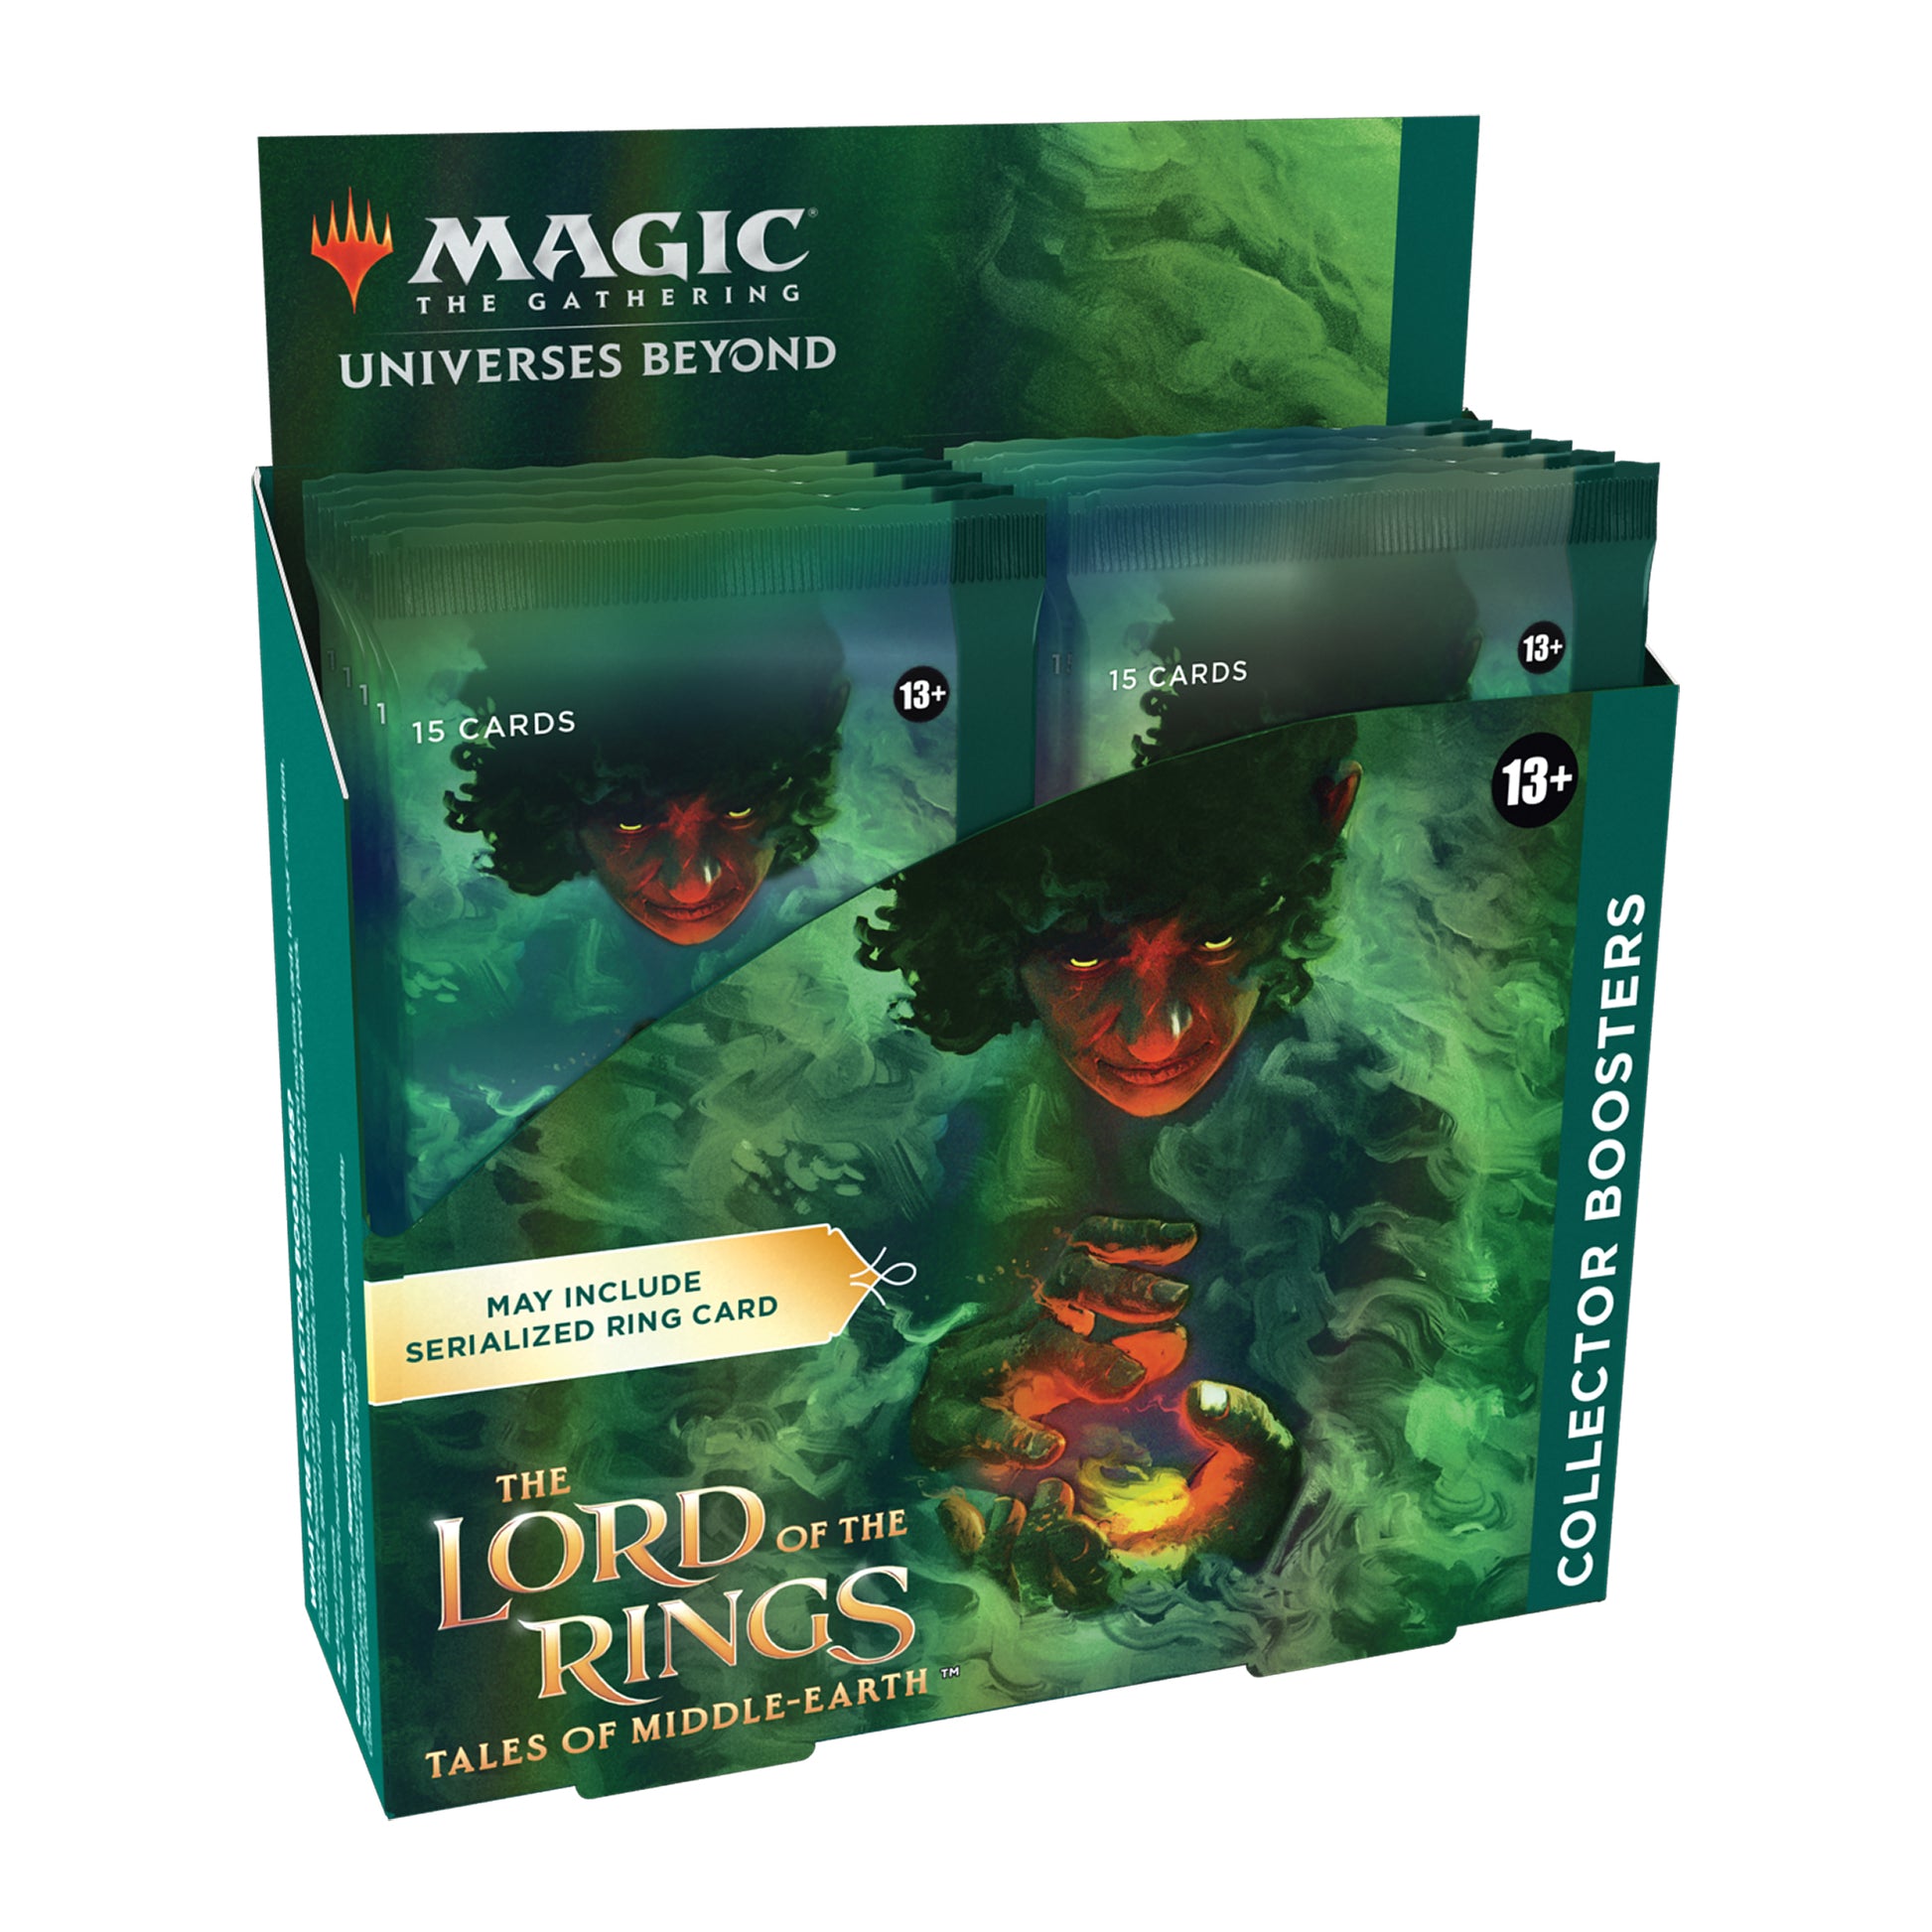 Magic the Gathering: Lord of the Rings - Tales of Middle-earth Collector Booster Box cover art.